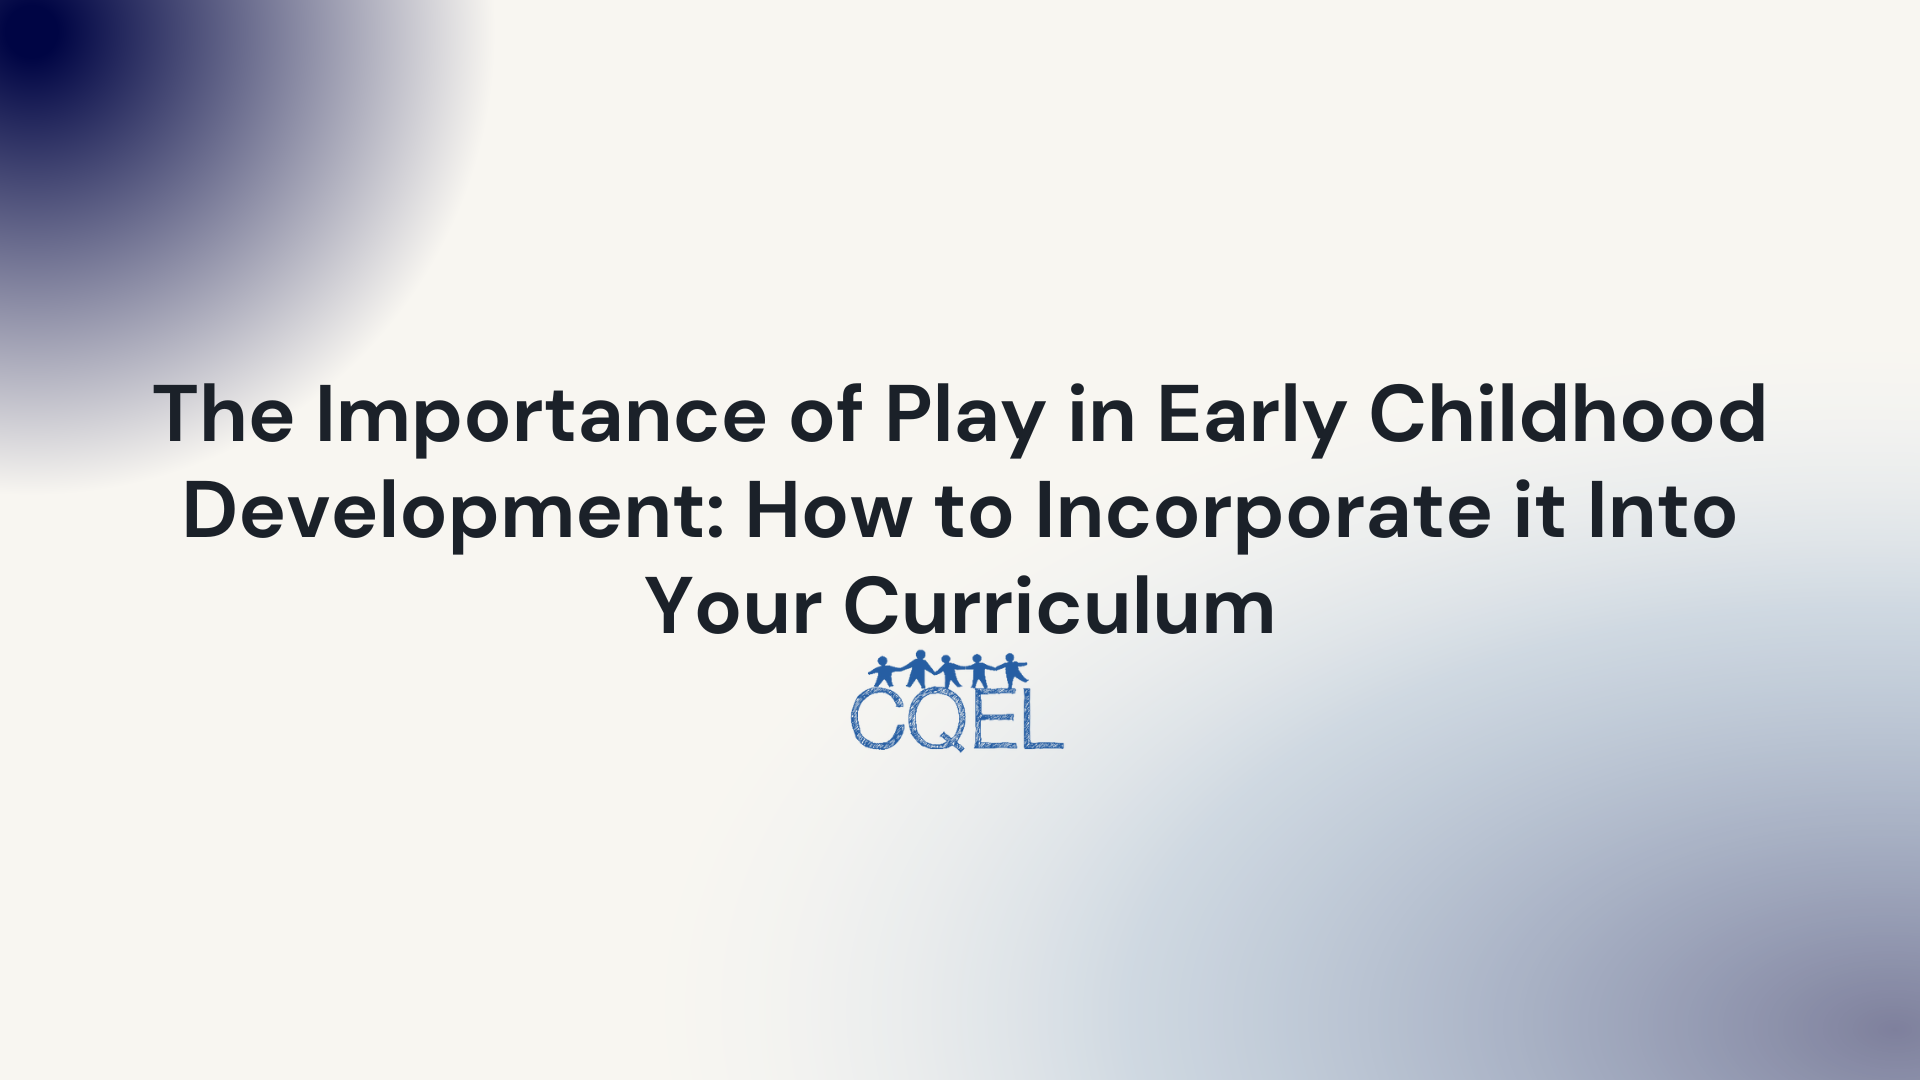 The Importance of Play in Early Childhood Development: How to Incorporate it Into Your Curriculum